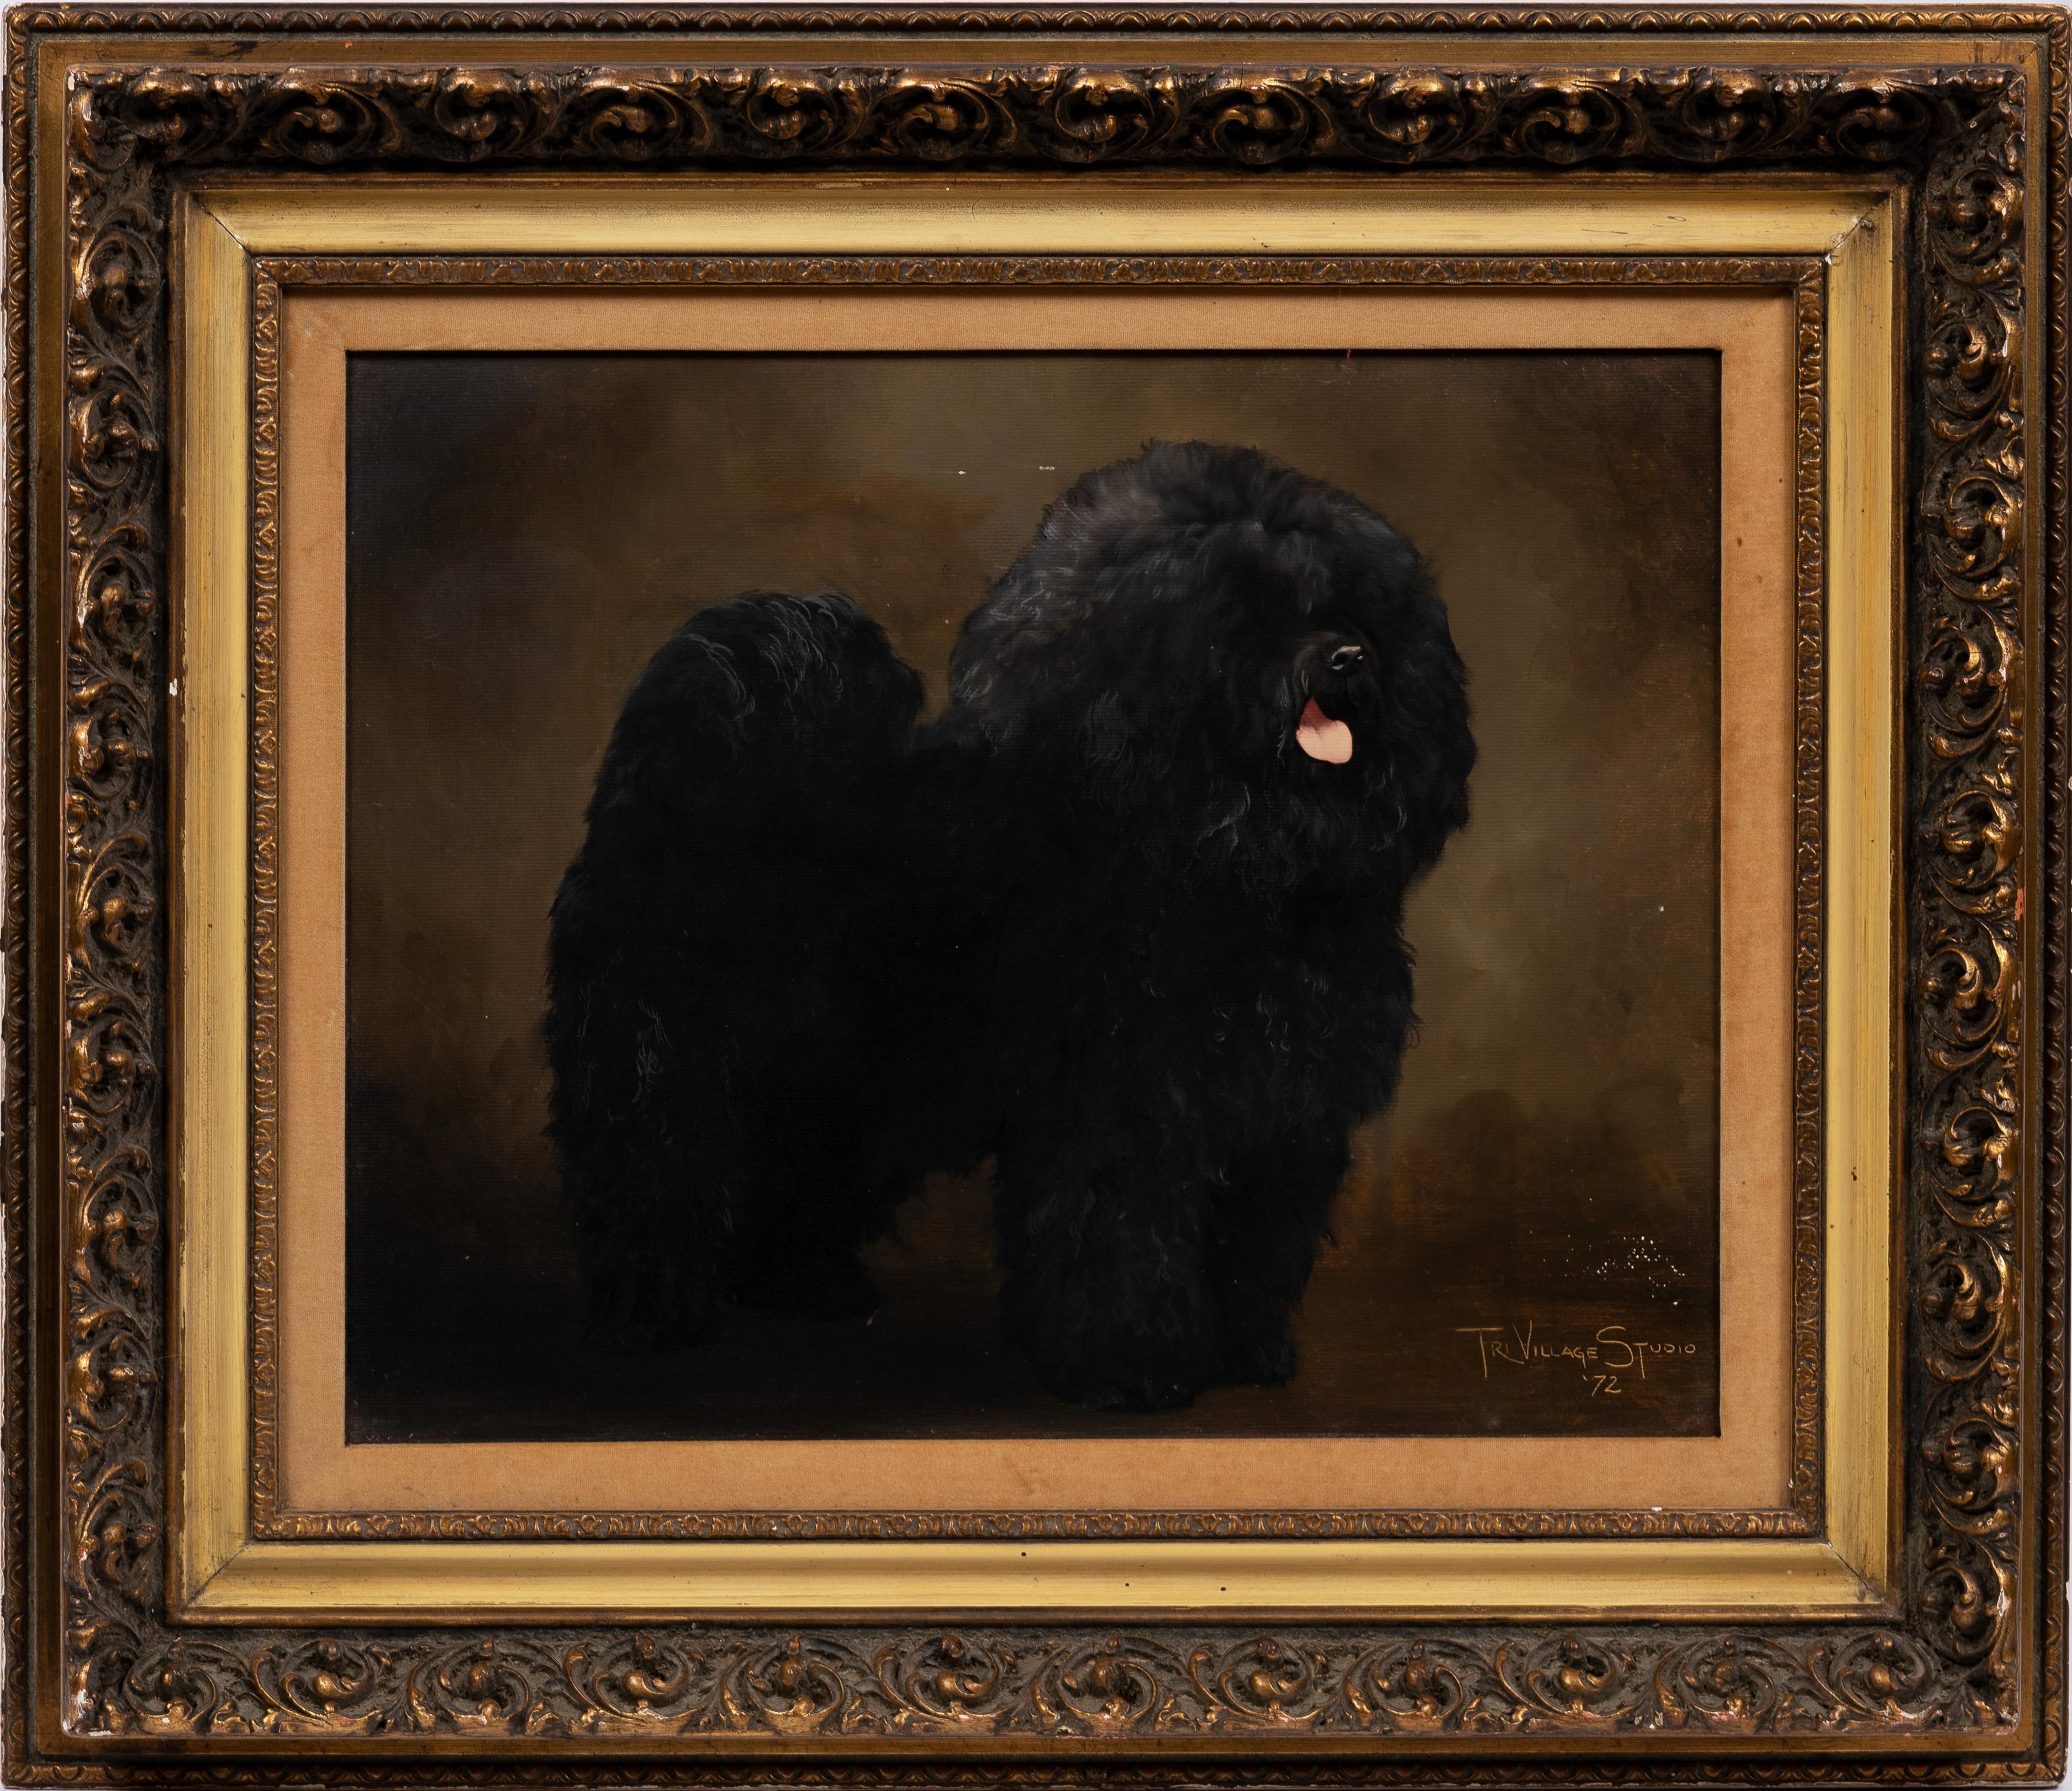 Unknown Interior Painting - Vintage American Signed Shaggy Dog Portrait Framed Animal Oil Painting